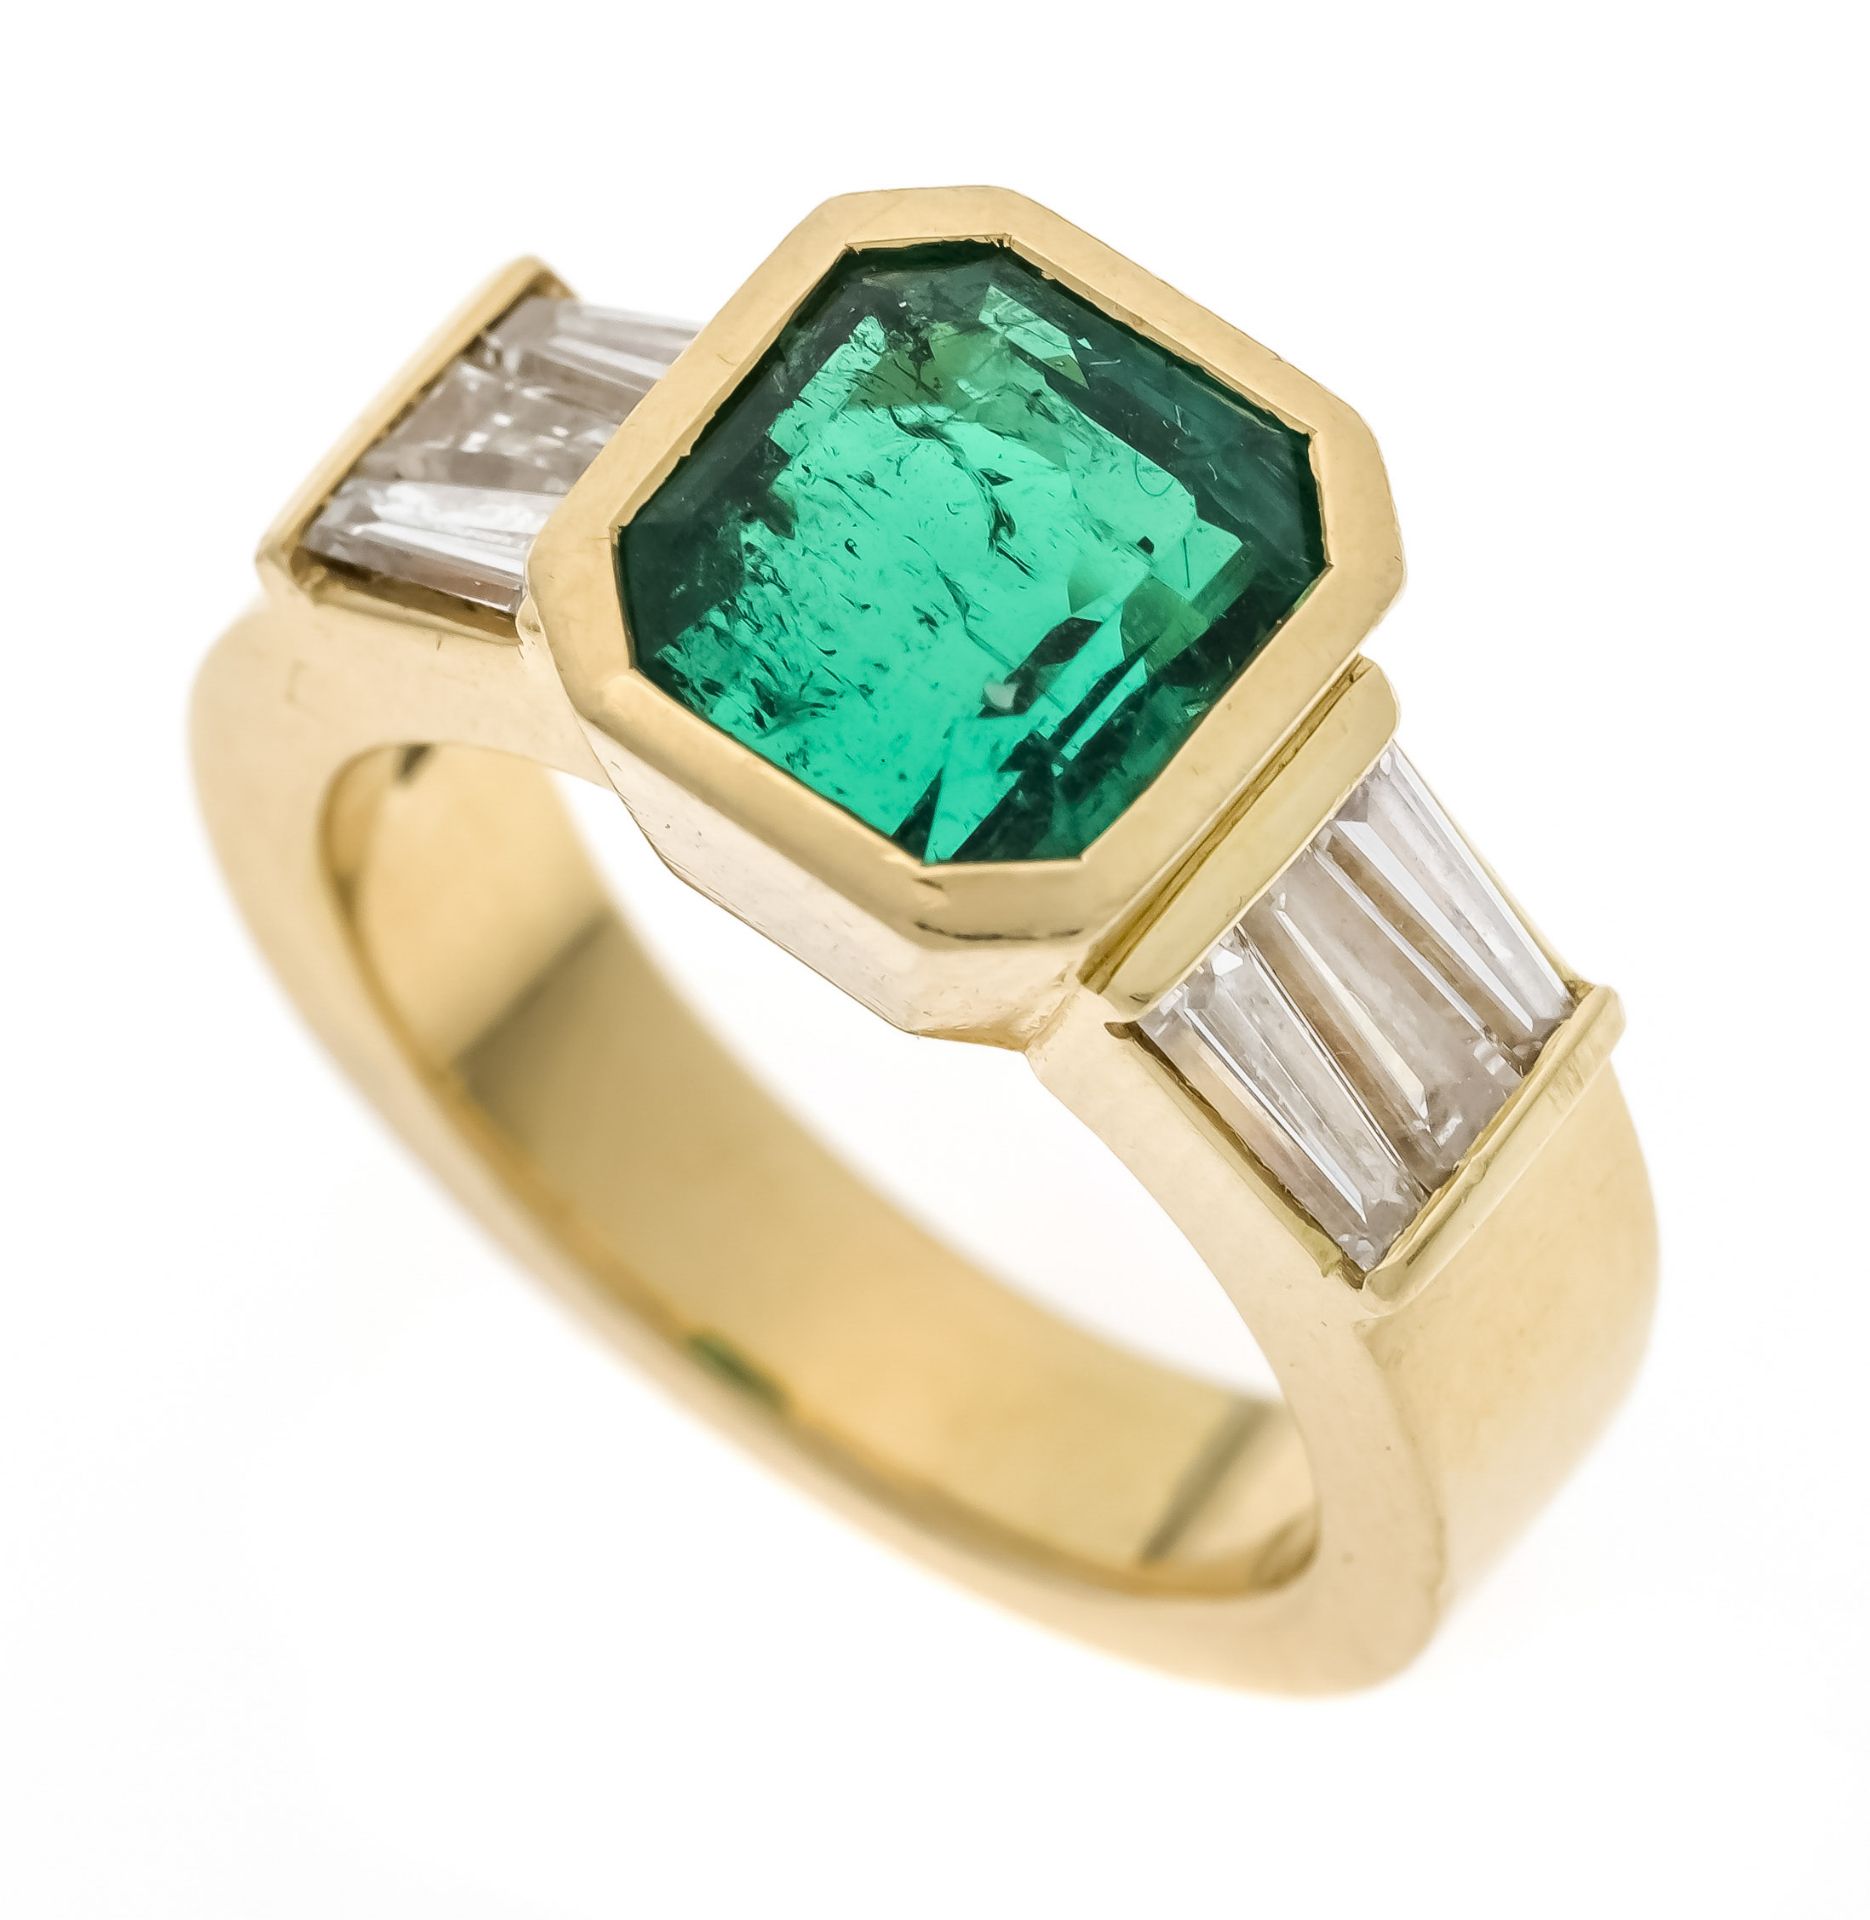 Gübelin emerald ring GG 750/000 with an excellent emerald-cut faceted emerald 2.45 ct in a